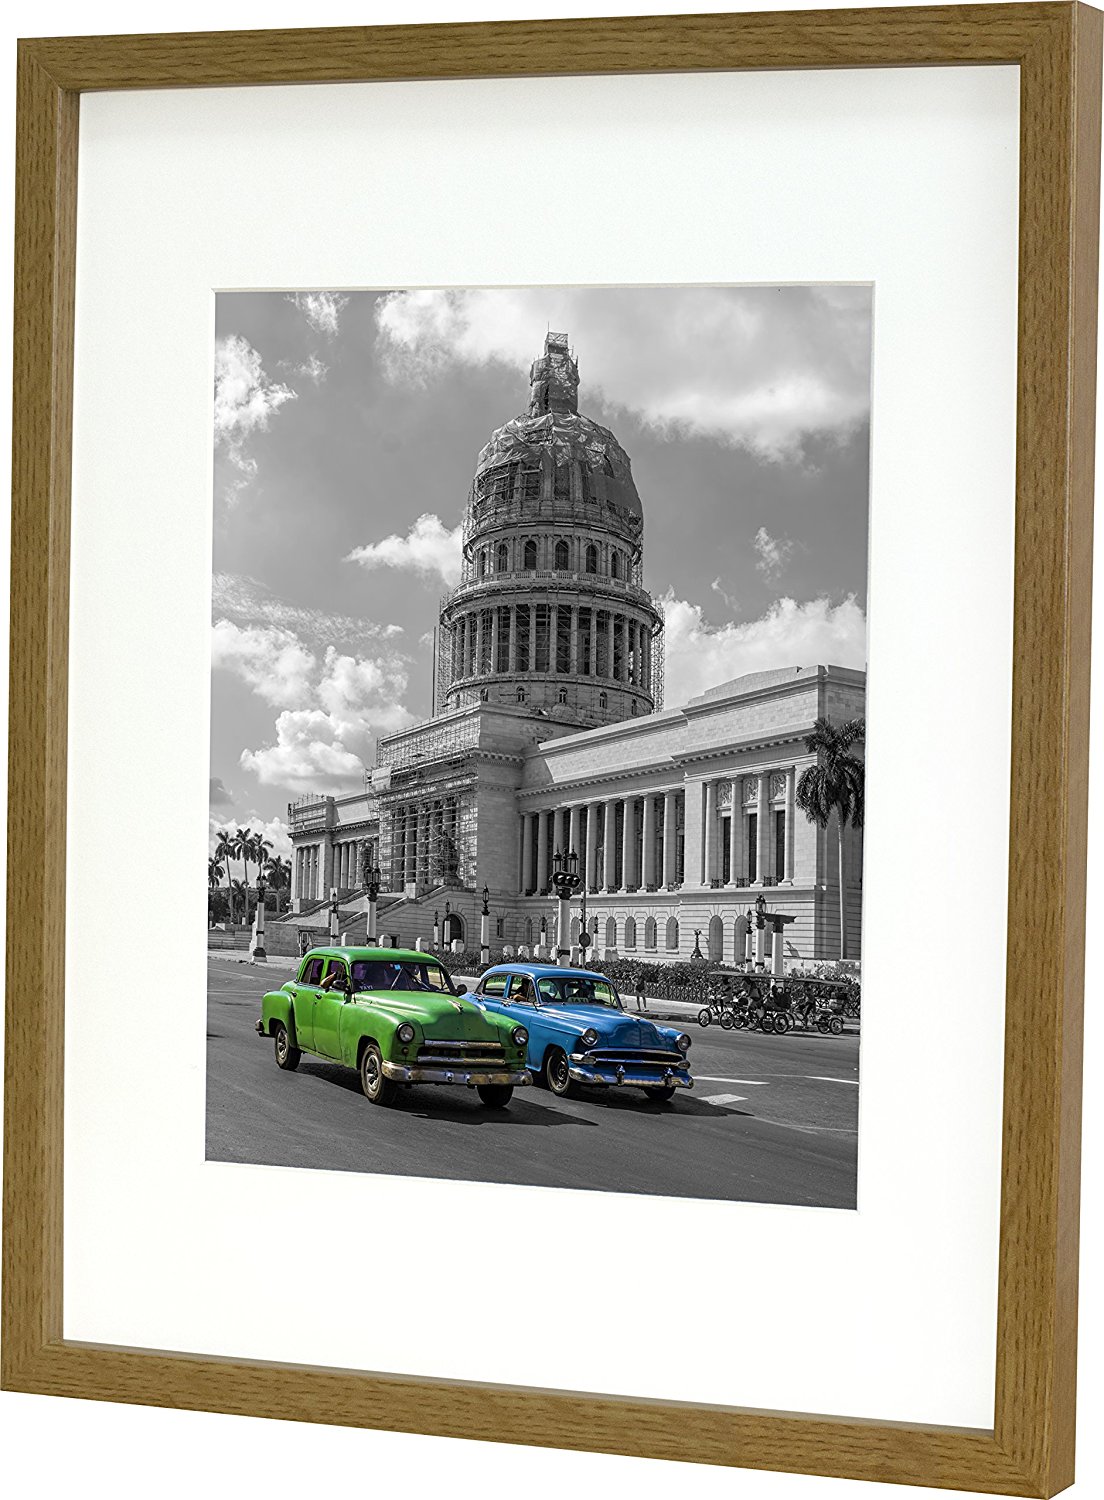 11 x 14-Inch Picture Photo Frame with mount for 8 x 10-Inch photo, OAK